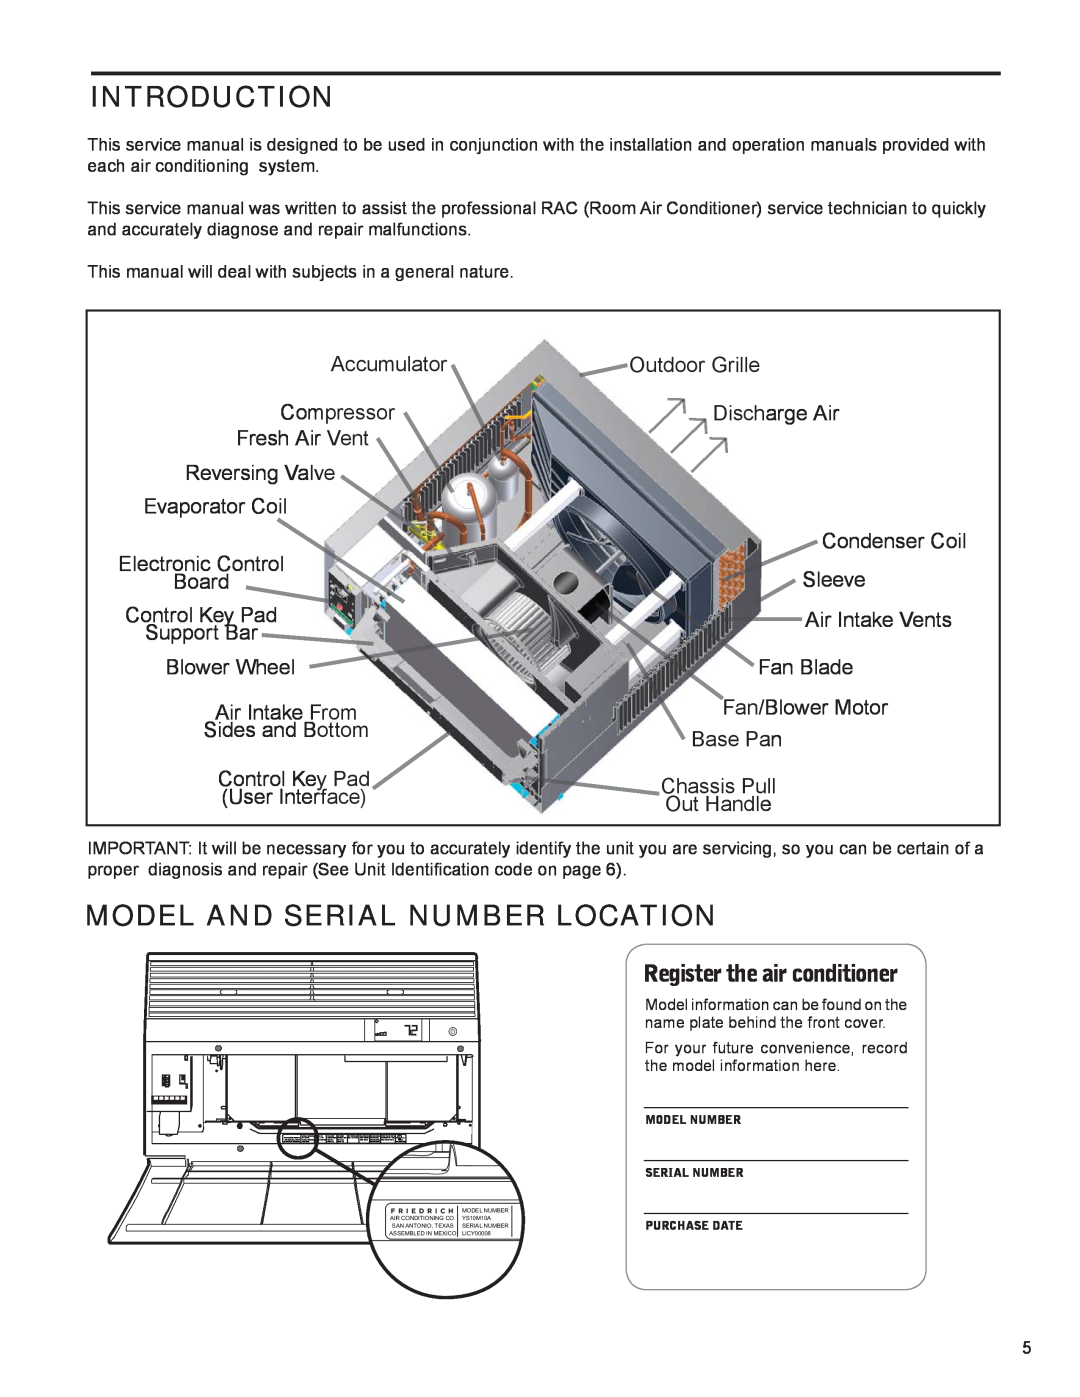 Friedrich R-410A service manual Introduction, Model And Serial Number Location, Register the air conditioner 